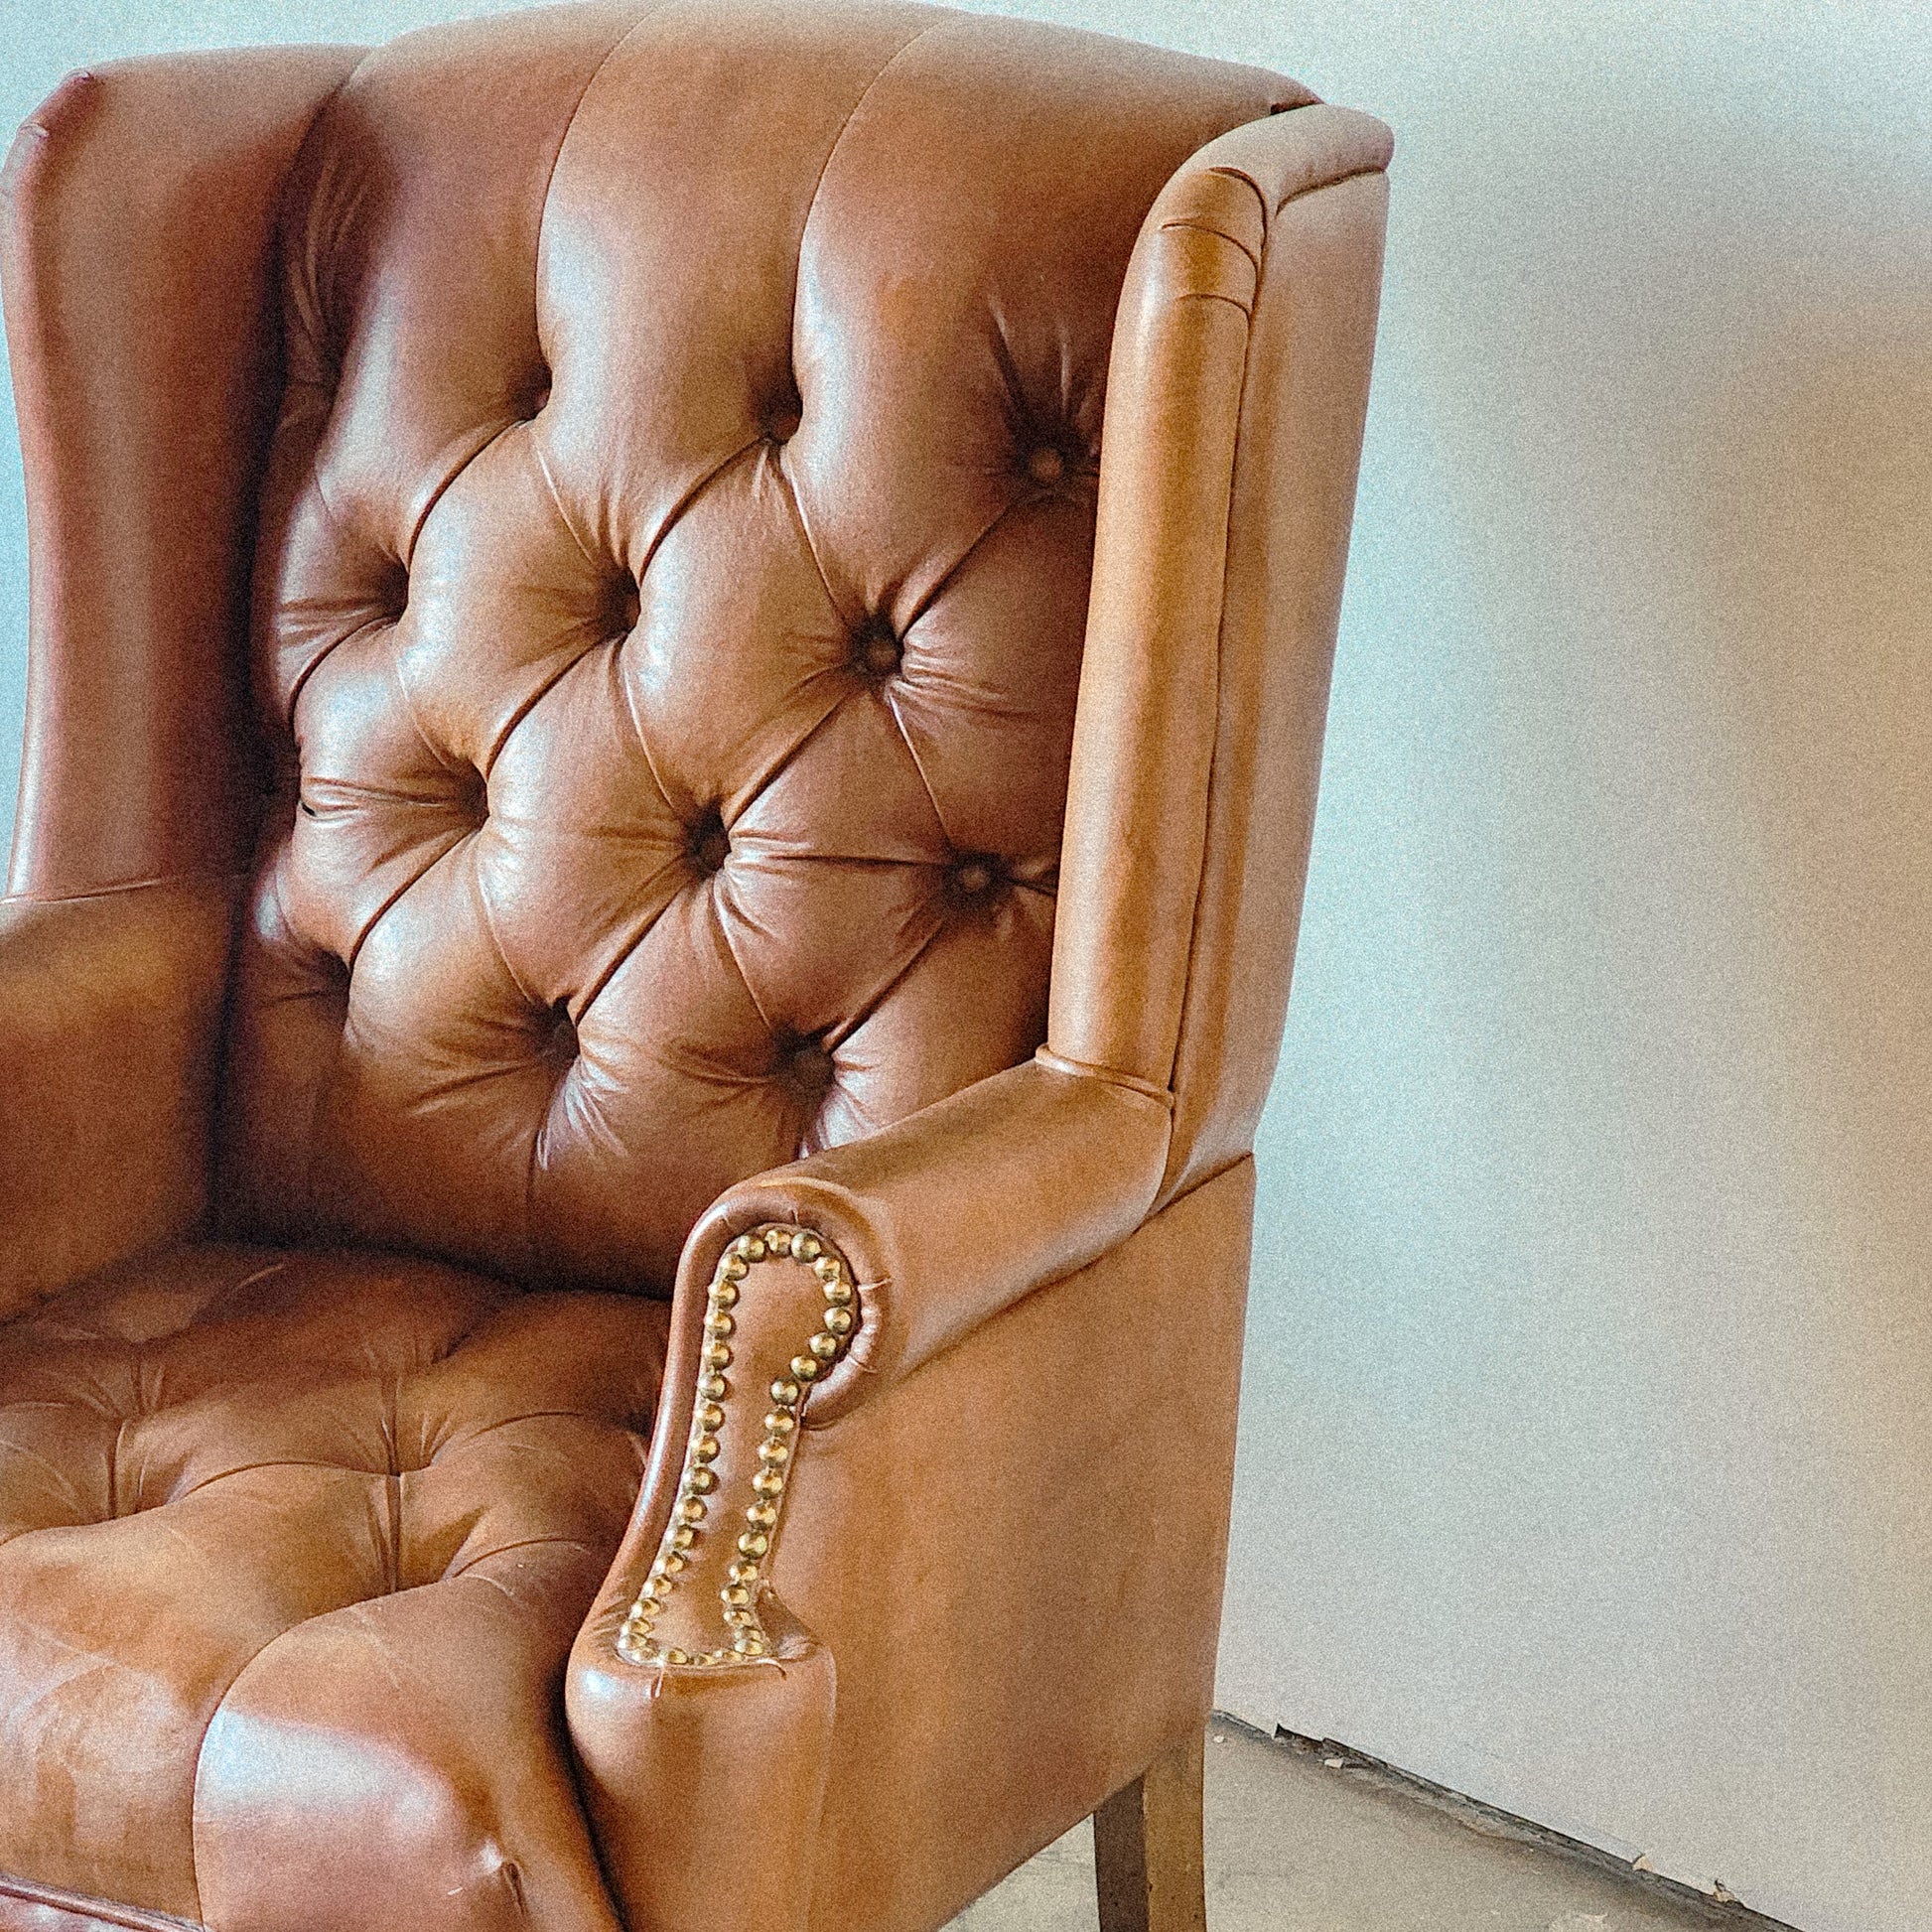 Tufted Leather Armchair - Reclaimed Mt. Goods